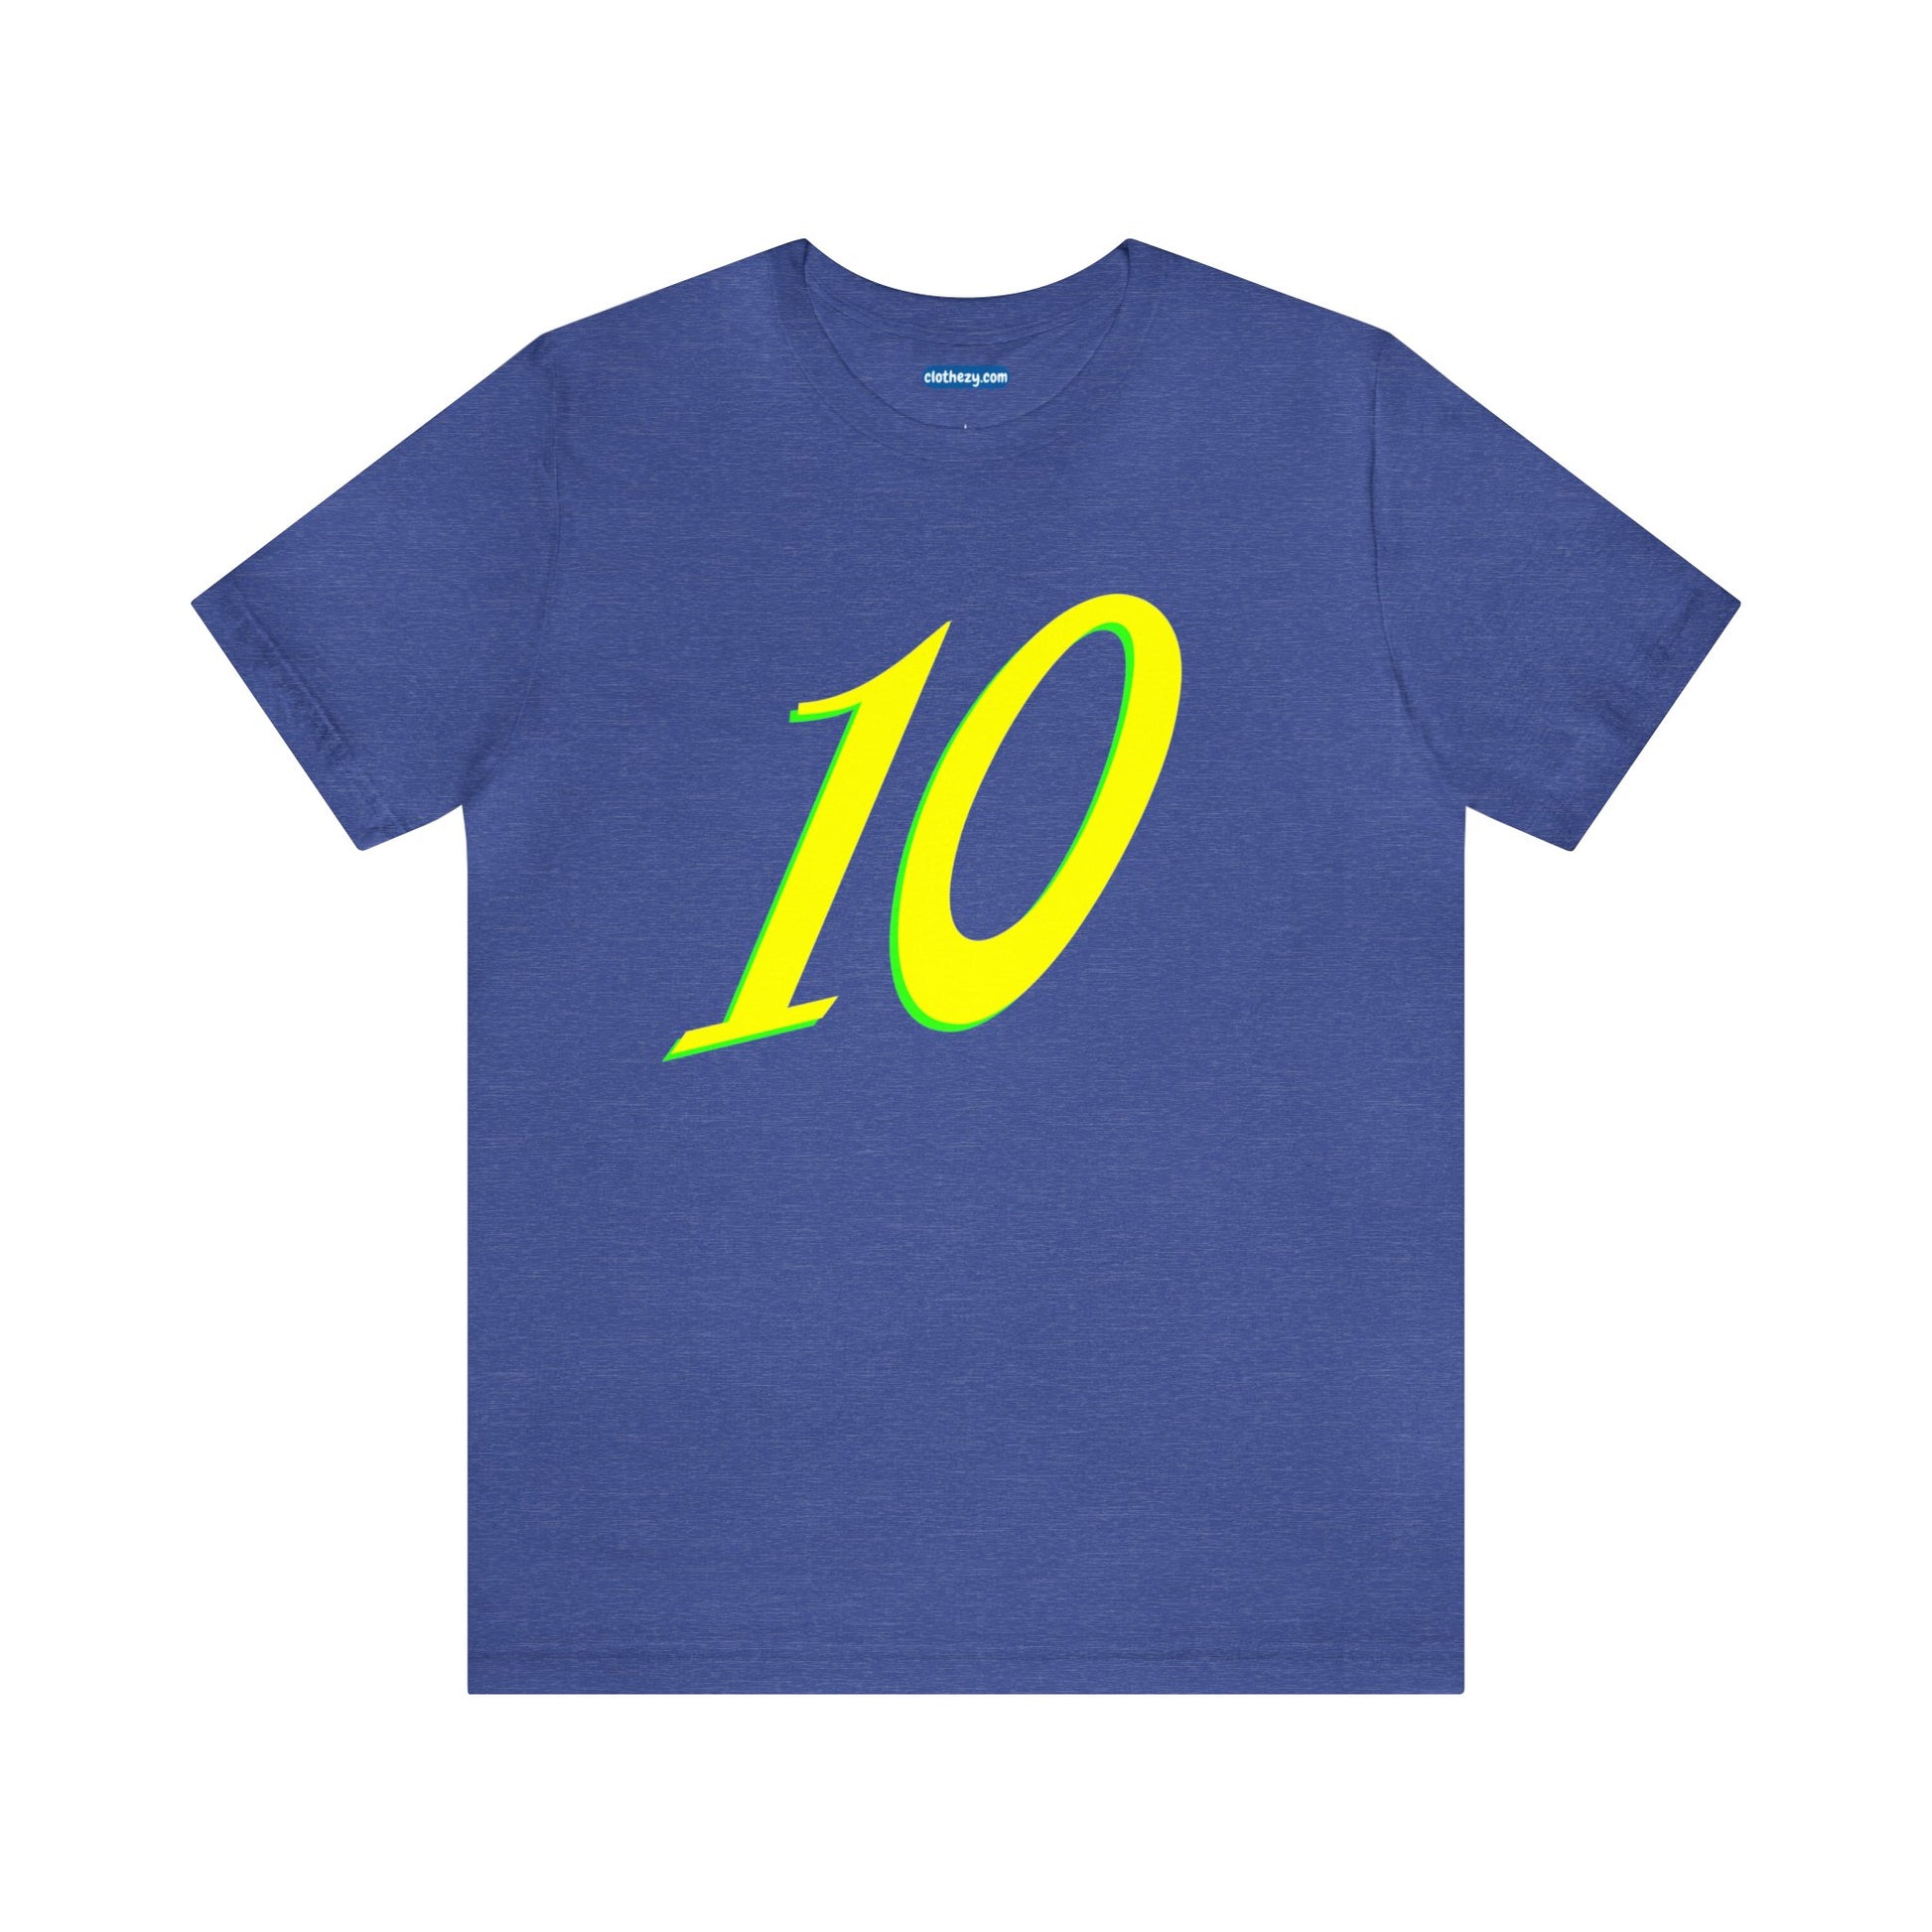 Number 10 Design - Soft Cotton Tee for birthdays and celebrations, Gift for friends and family, Multiple Options by clothezy.com in Royal Blue Heather Size Small - Buy Now